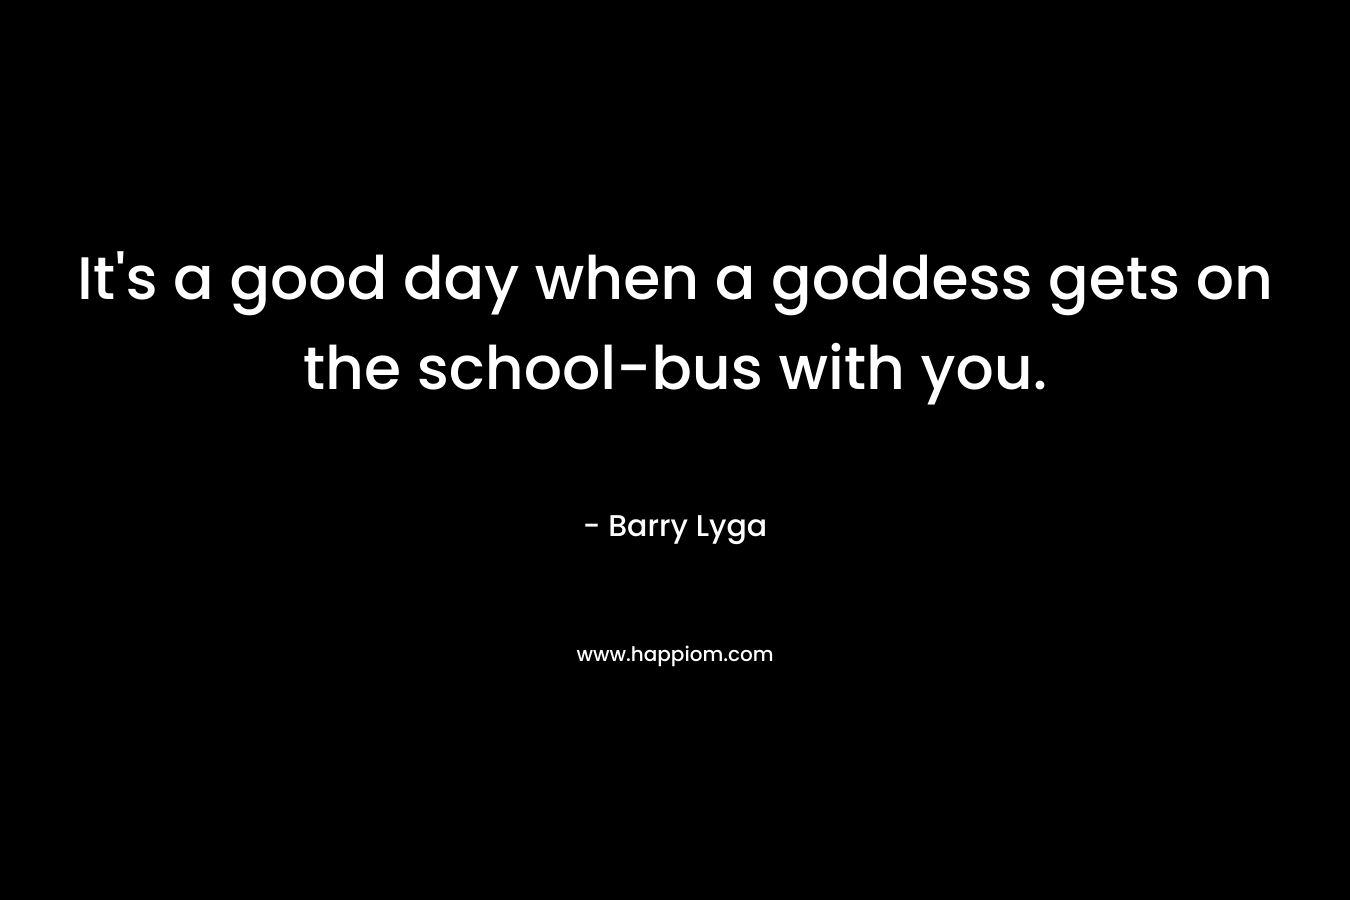 It’s a good day when a goddess gets on the school-bus with you. – Barry Lyga